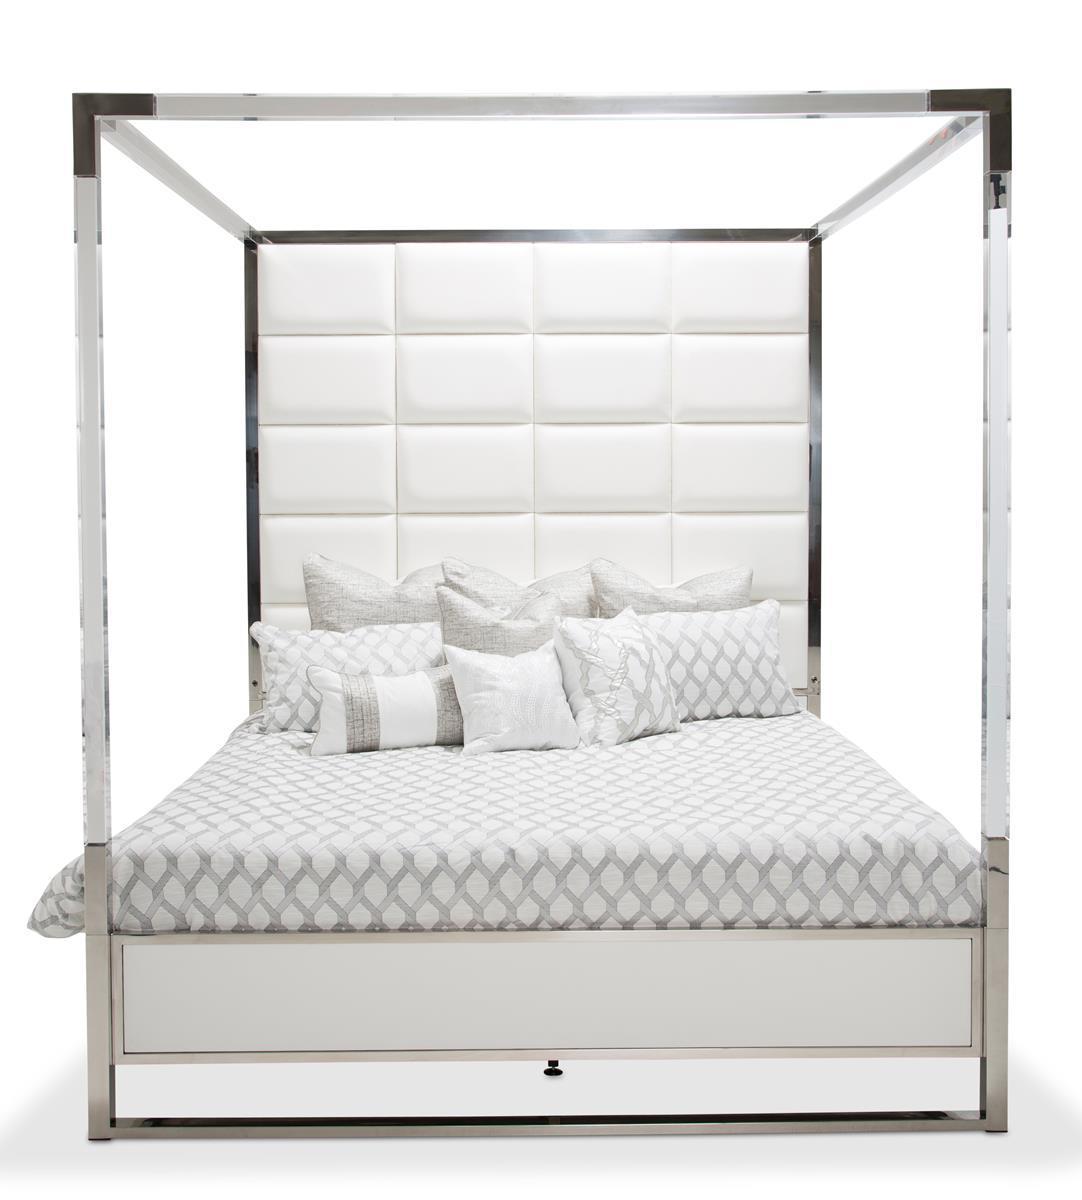 State St Queen Metal Canopy Bed in Glossy White